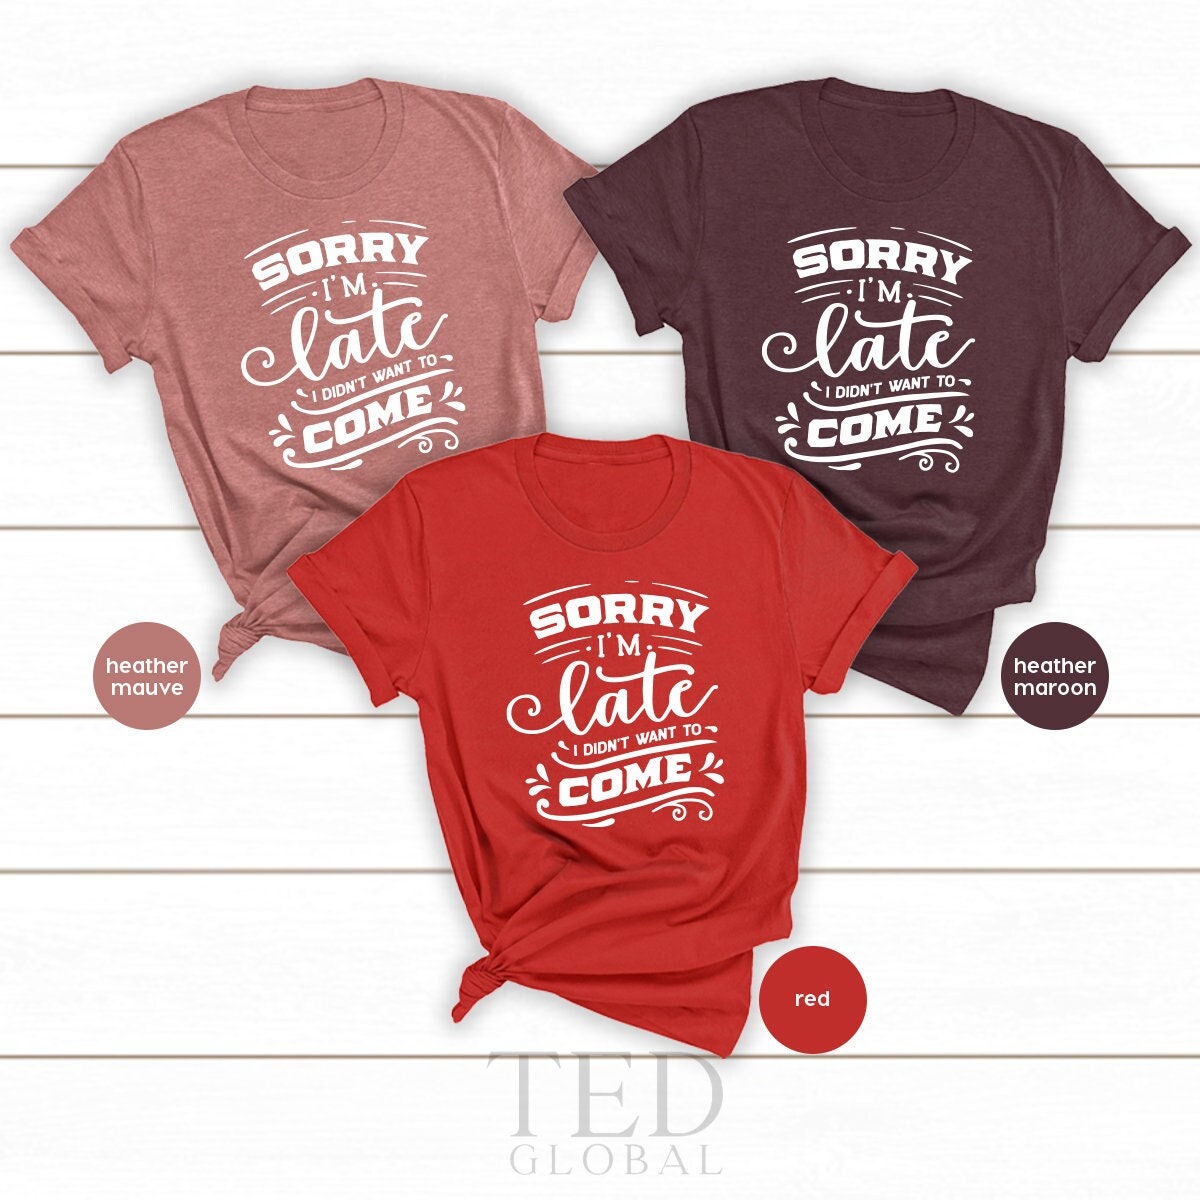 Sorry I'm Late I Didn't Want to Come TShirt, Sorry Not Sorry, Funny Shirt, Cute Sassy Gift, Introvert Shirt, Sarcastic Shirt, Birthday Shirt - Fastdeliverytees.com